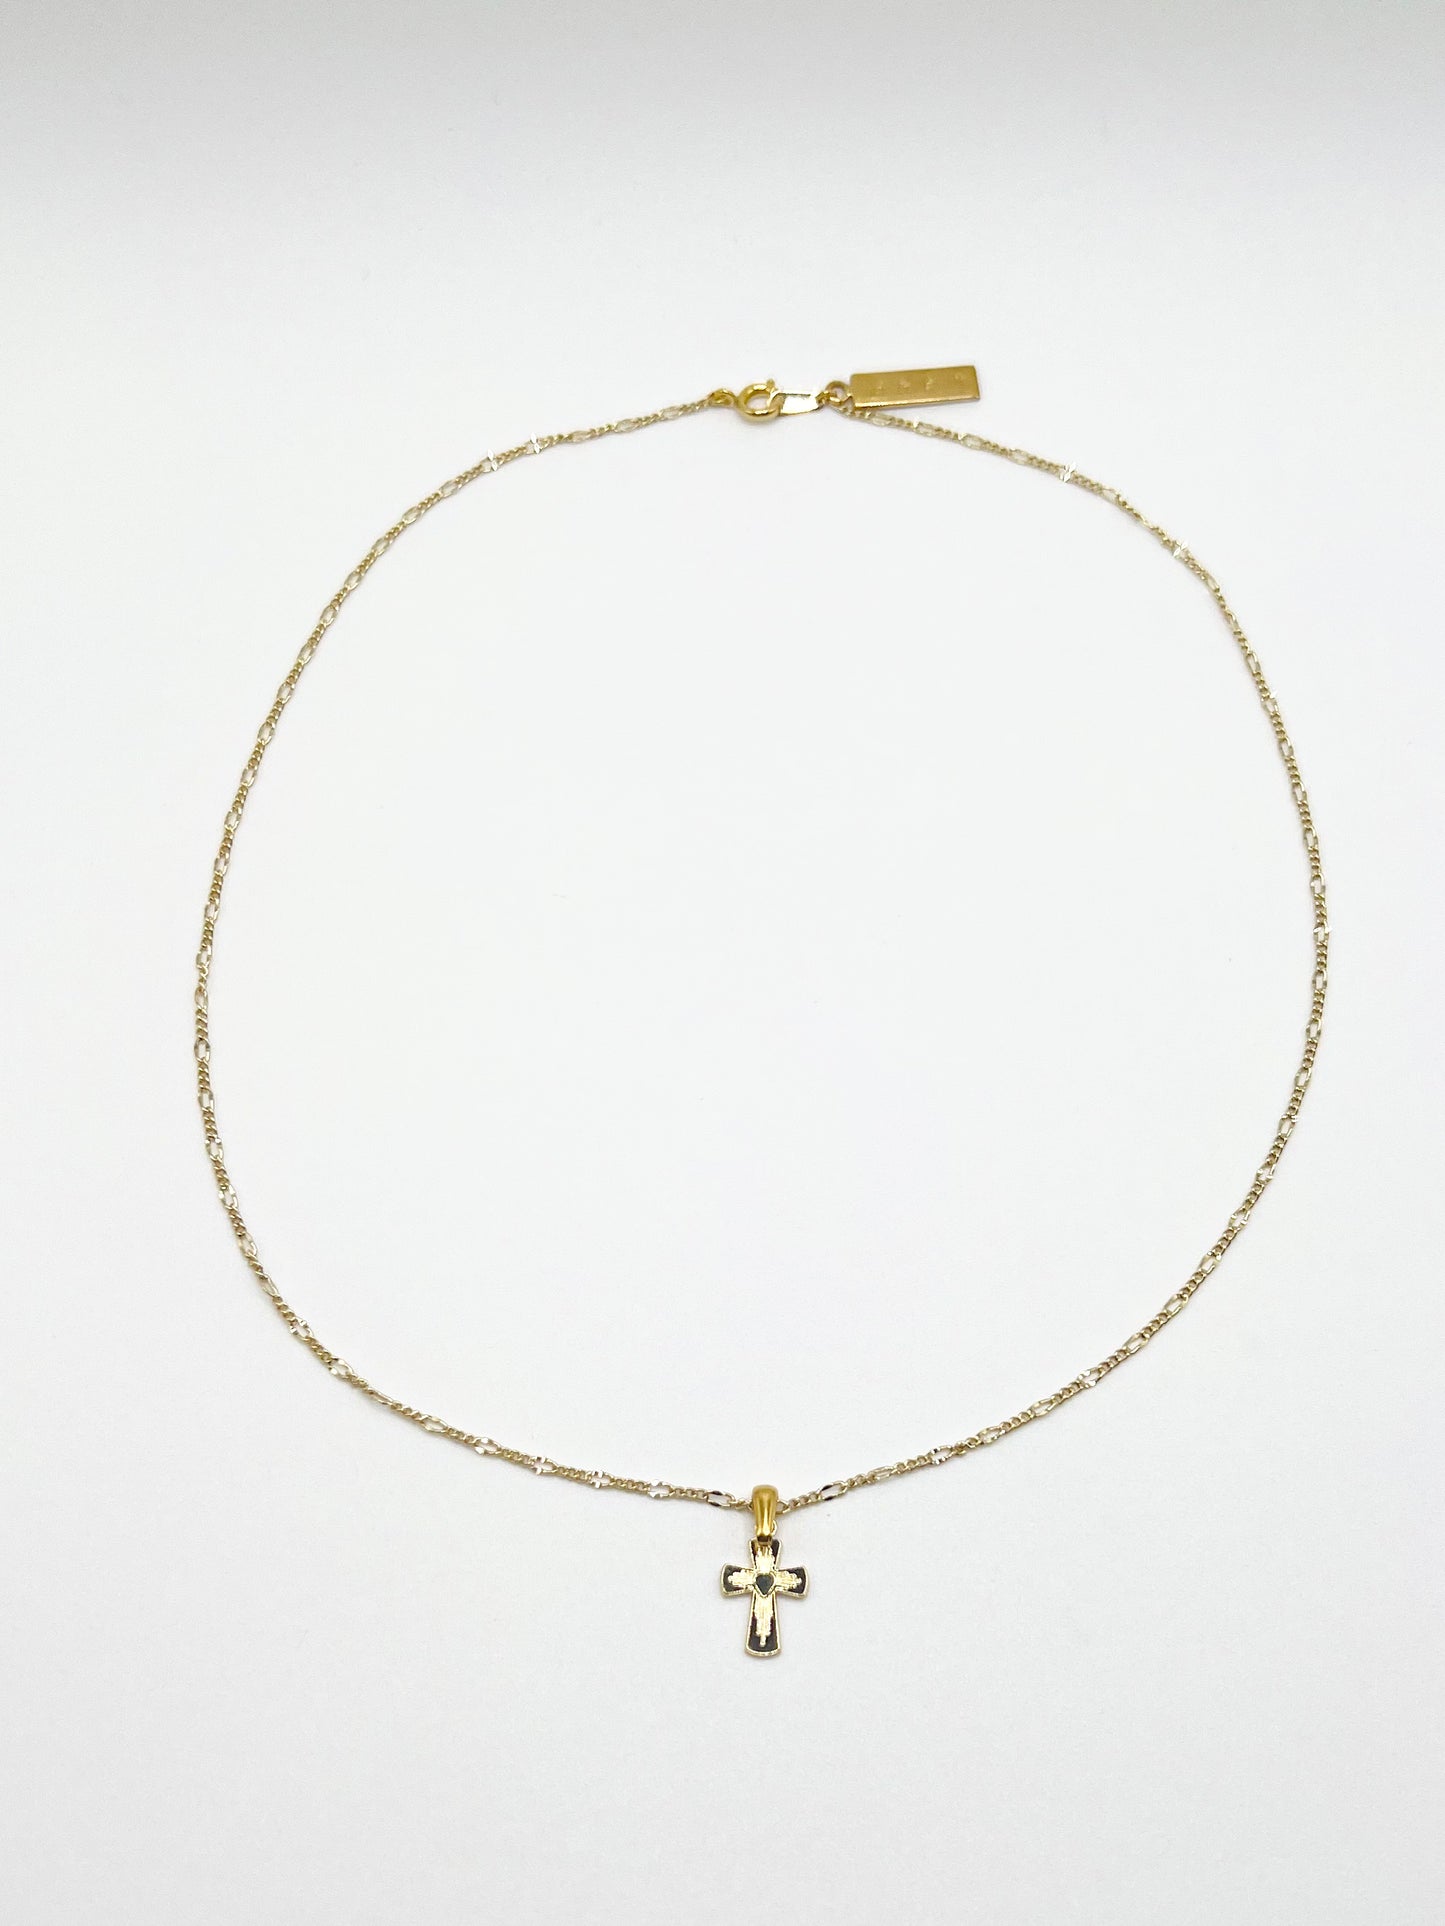 NW cross motif necklace - Gold